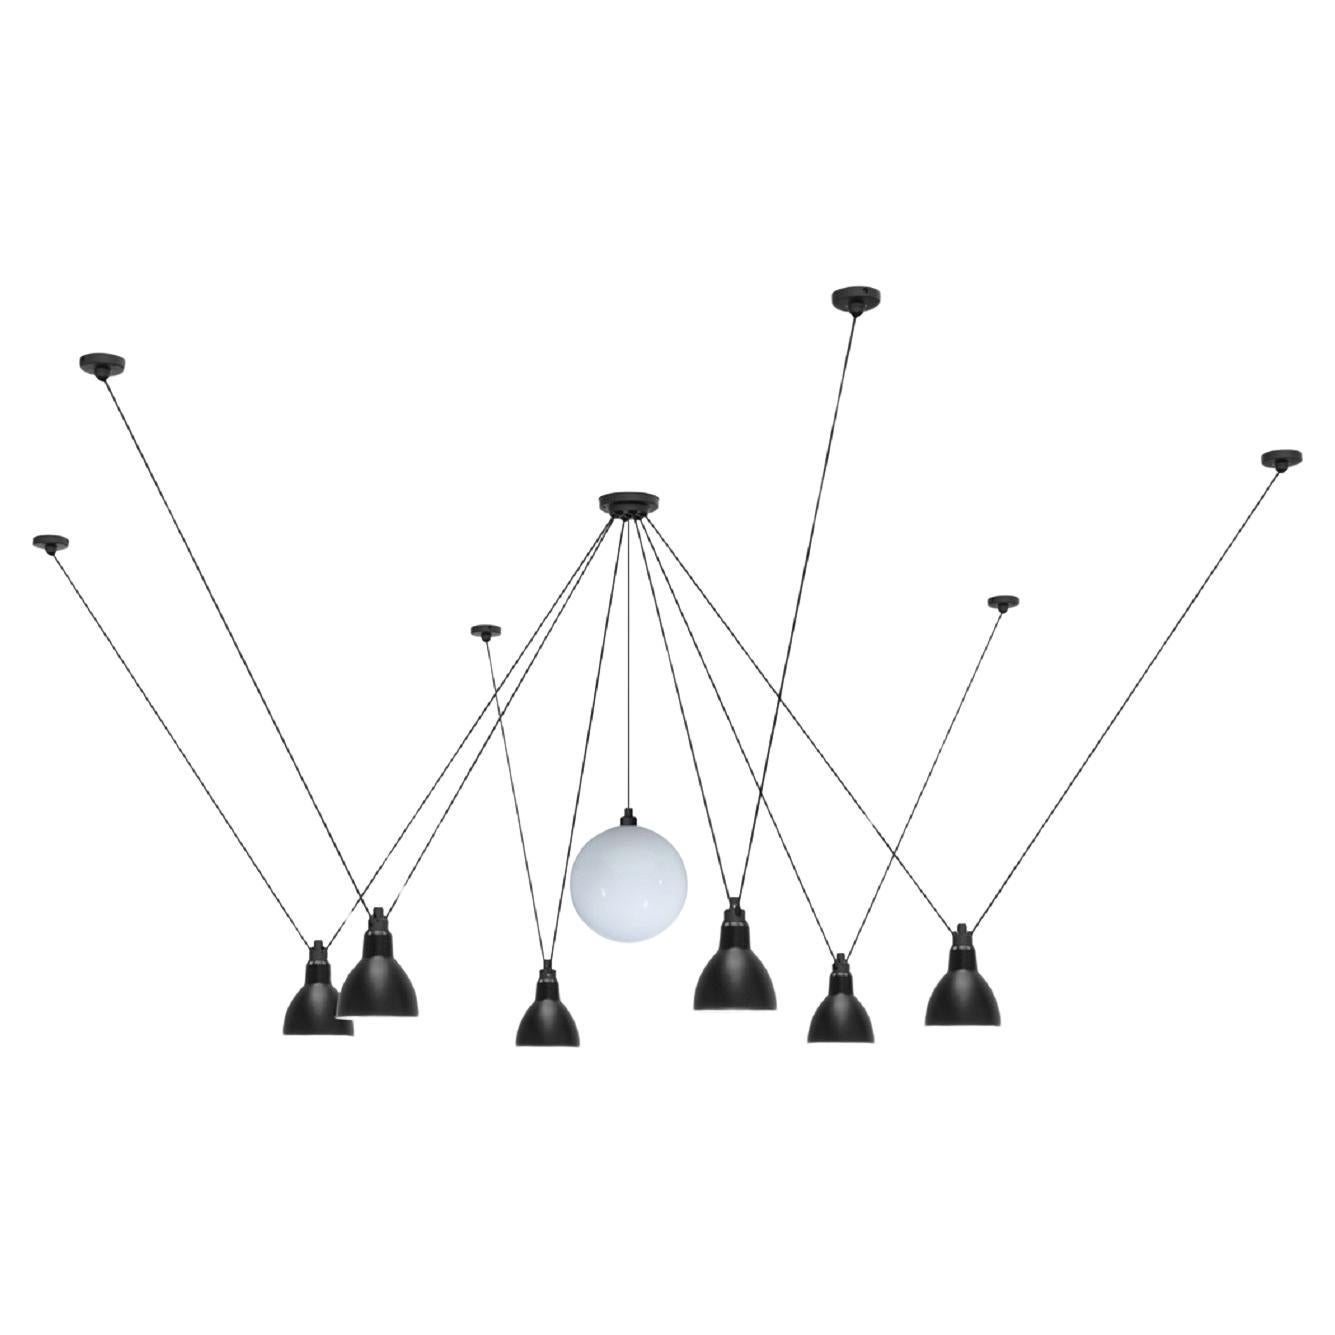 DCW Editions Les Acrobates N°327 L Round Pendant Lamp in Black & Glassball 250